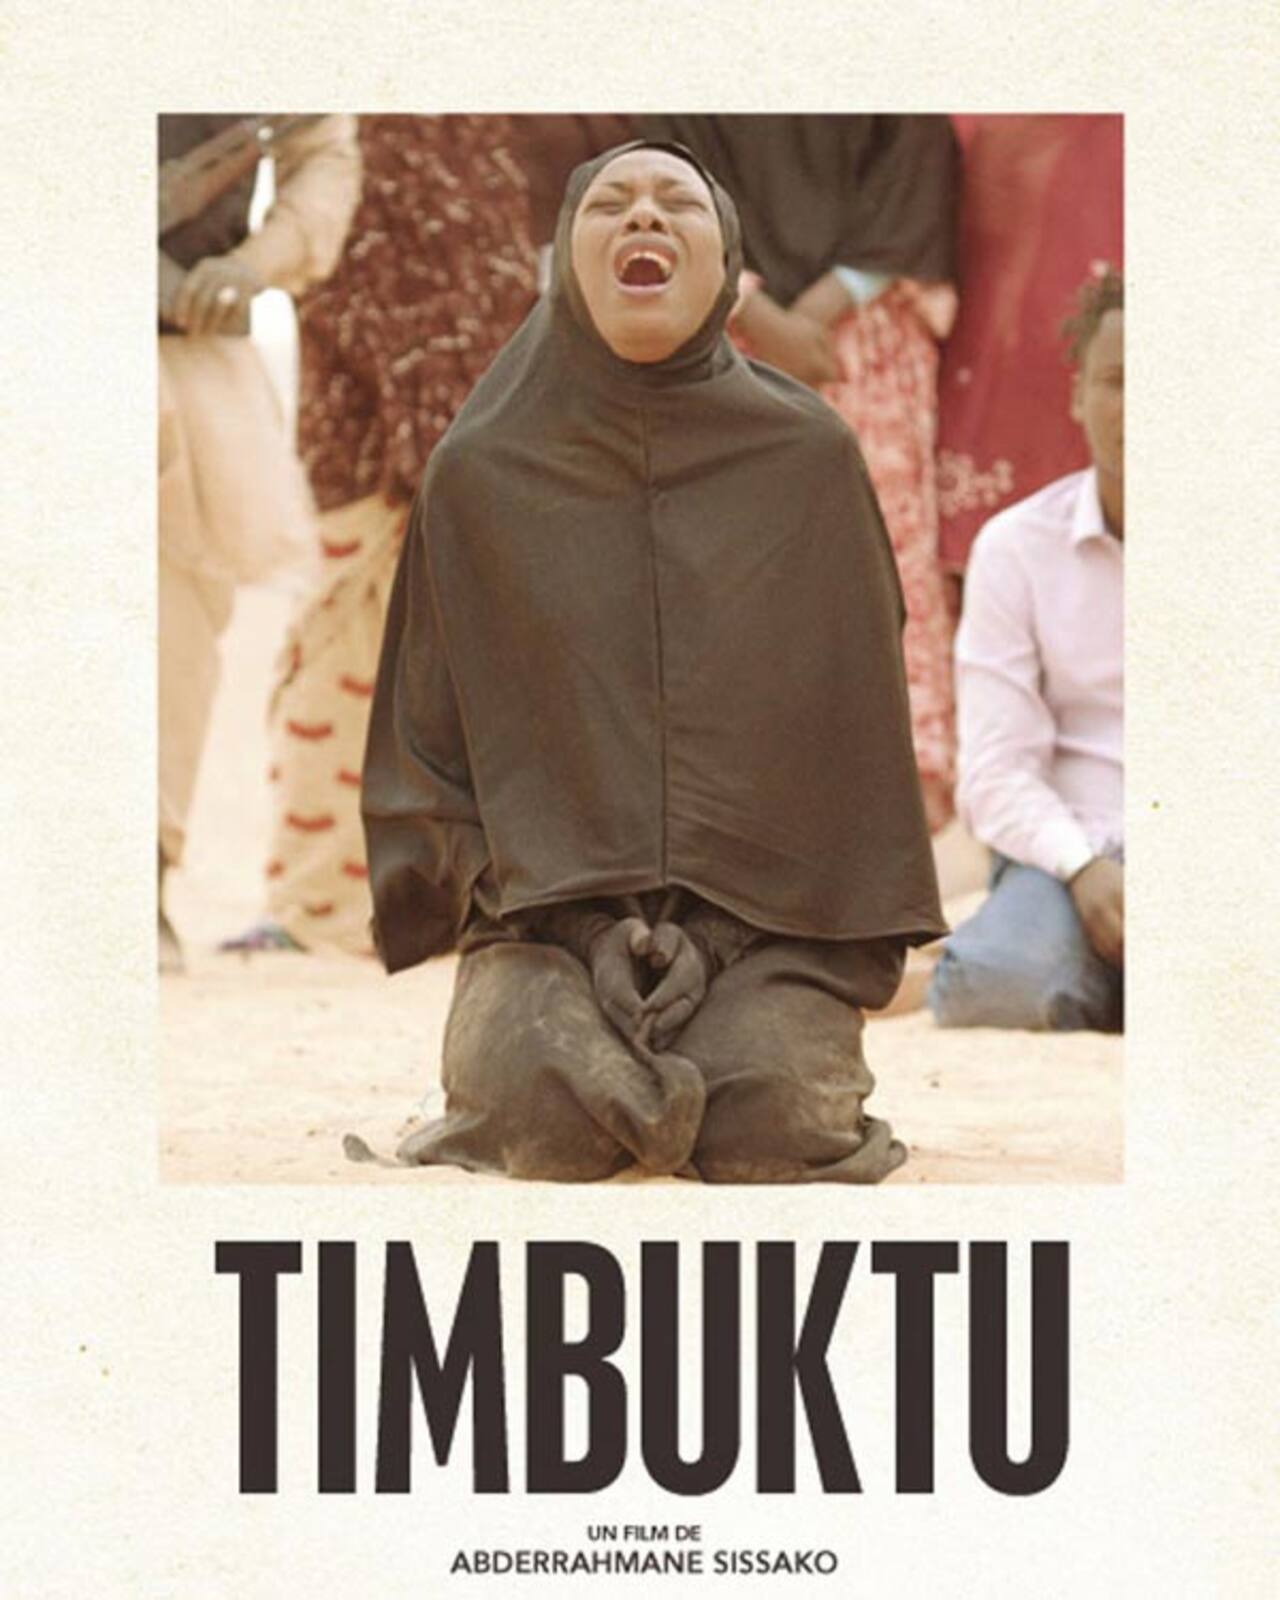 Timbuktu movie review: The film is a stunningly shot condemnation of intolerance